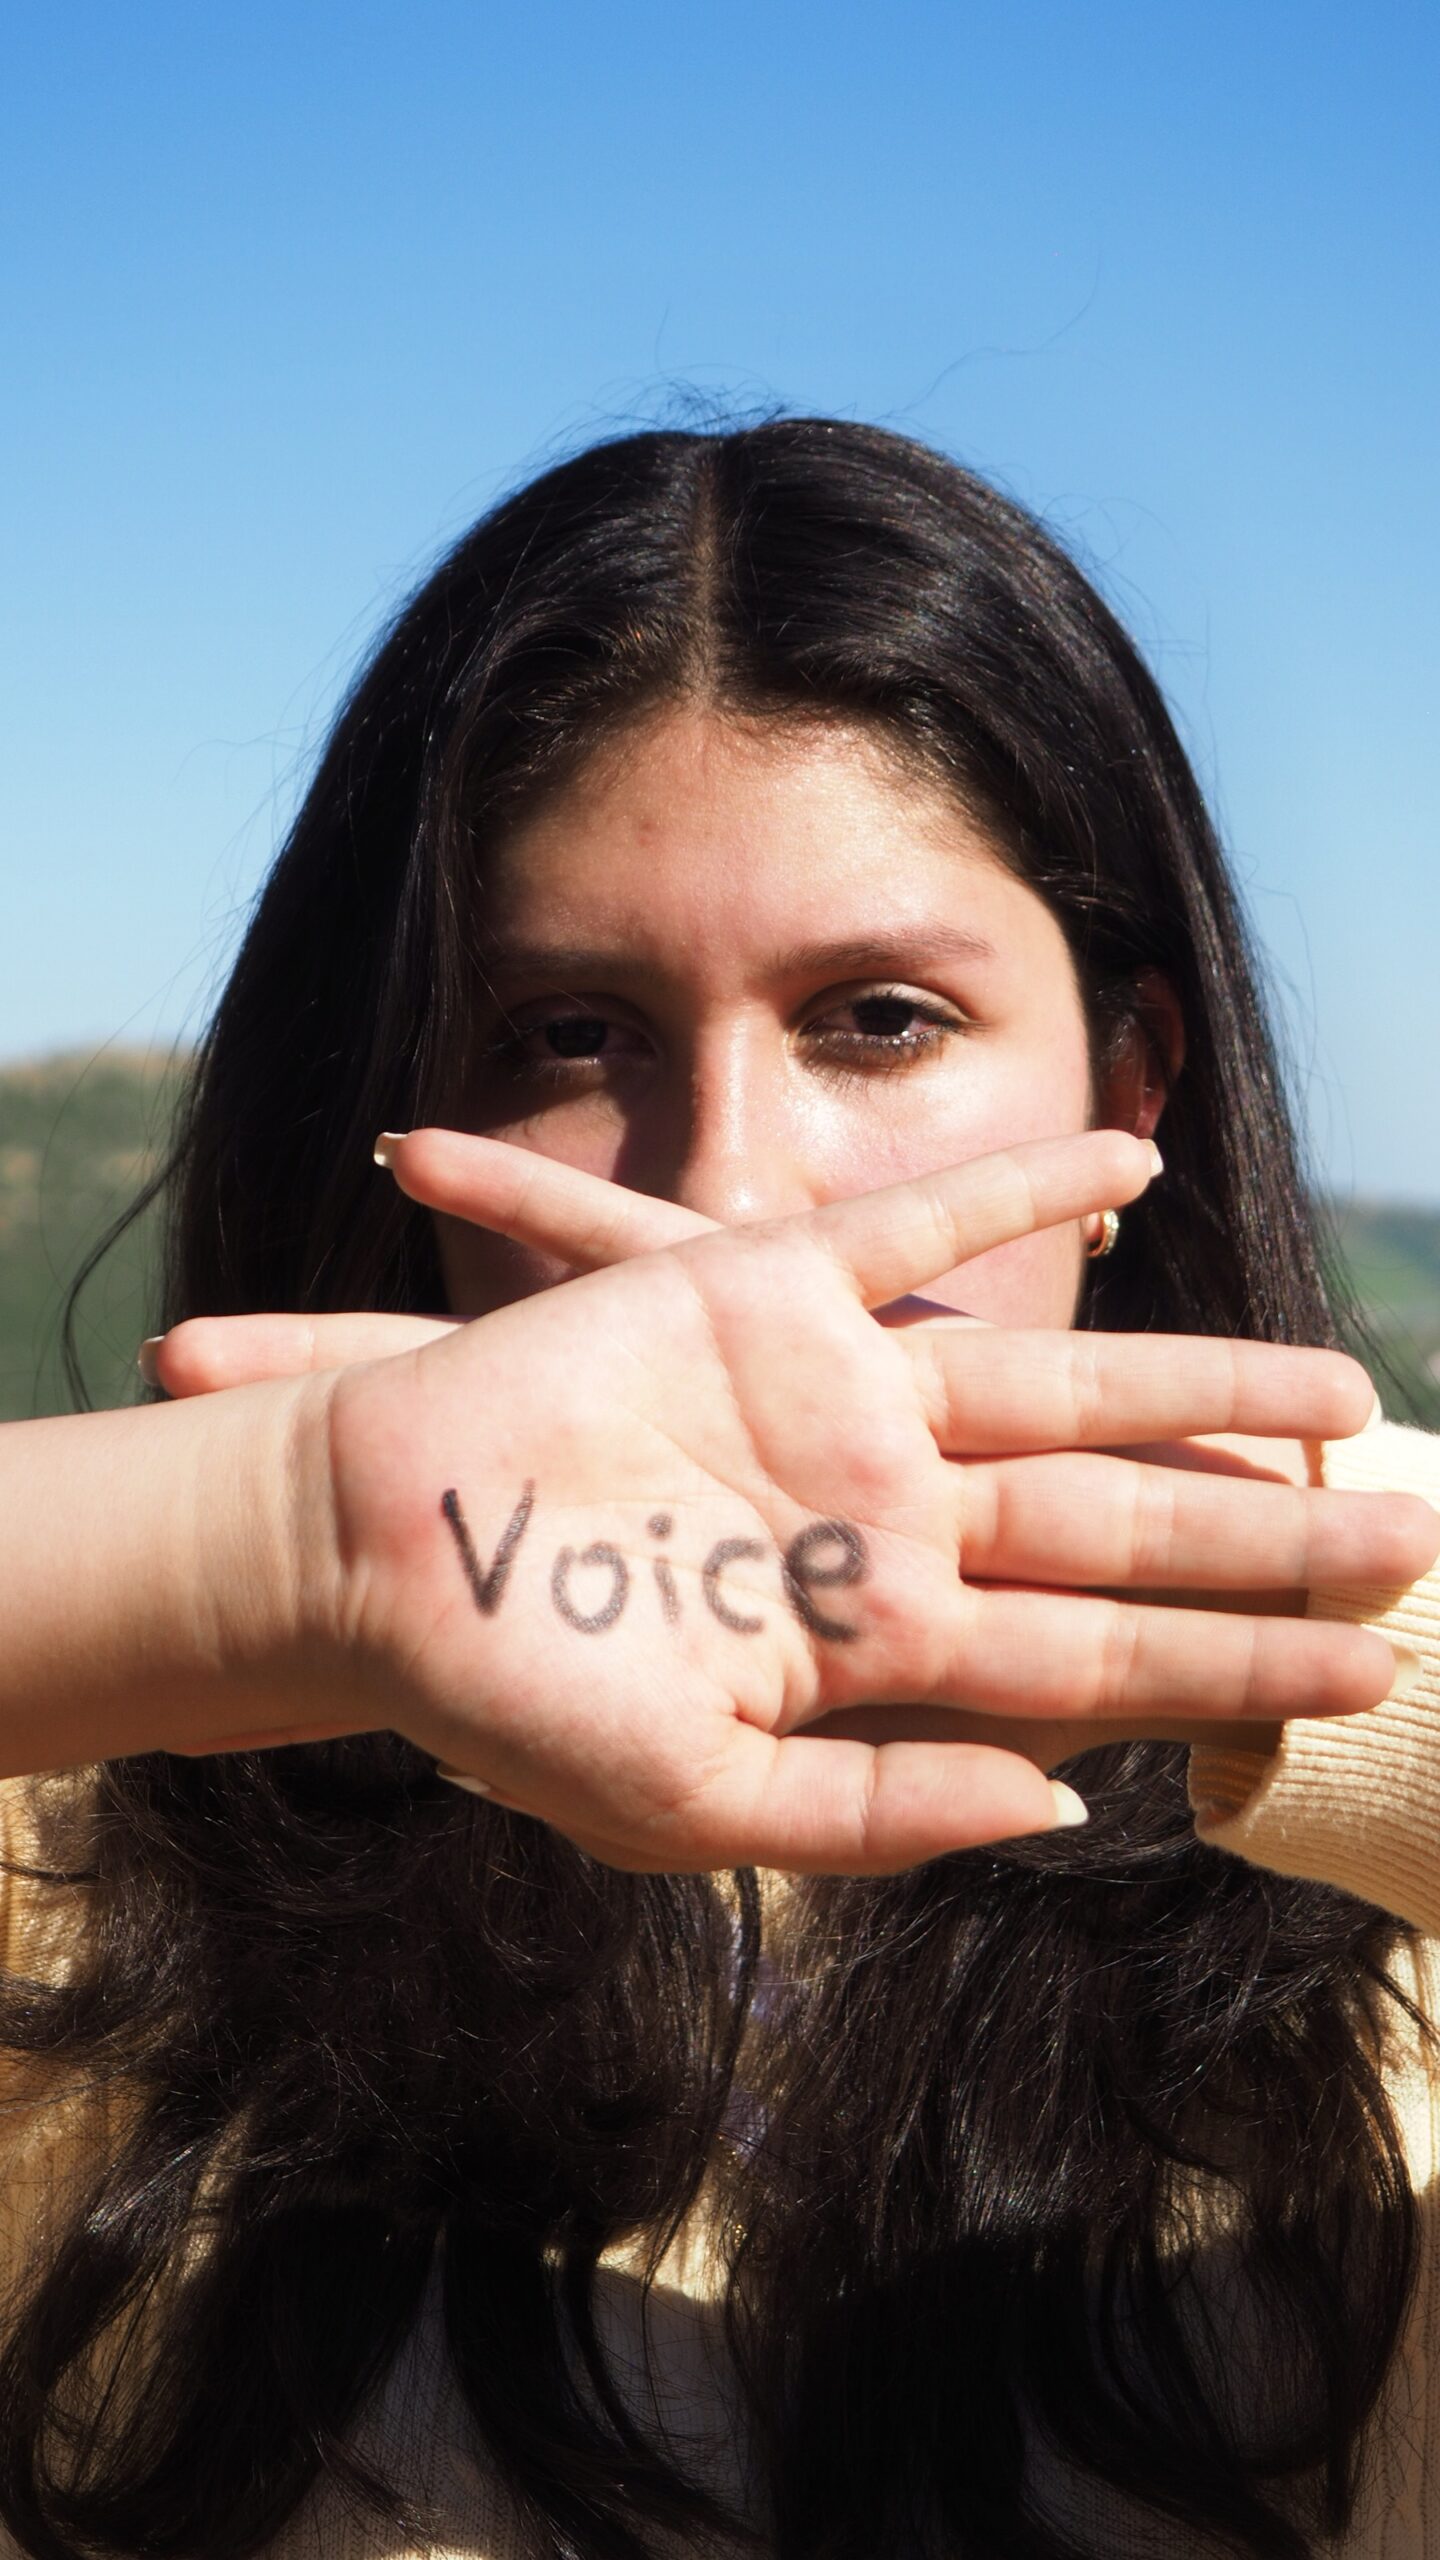 woman with the word voice written in her hand